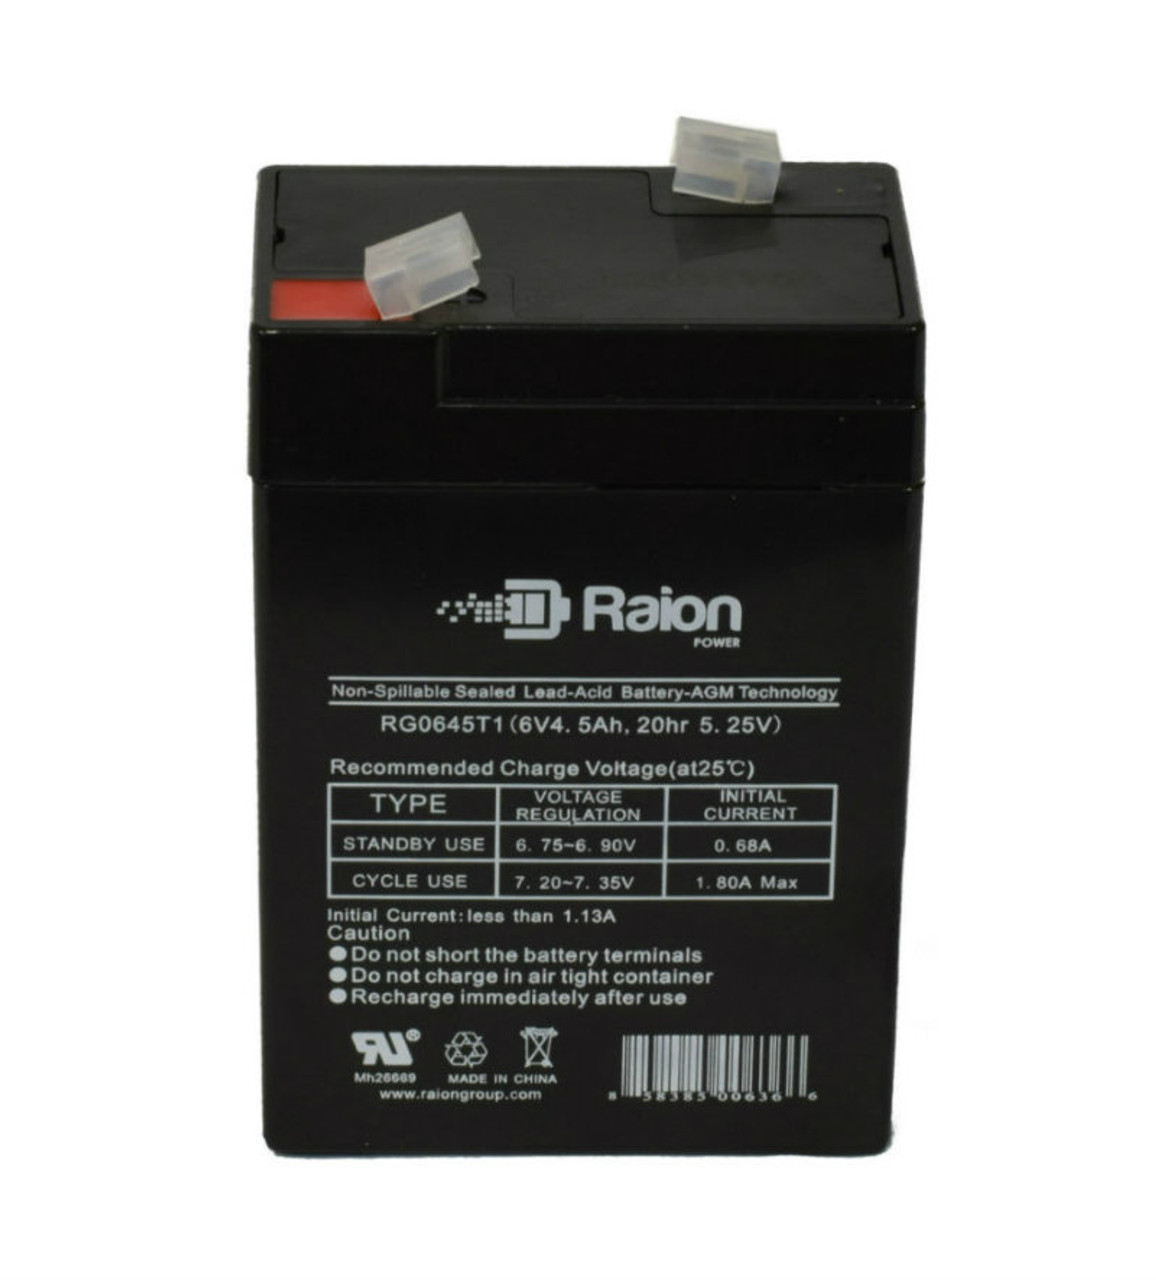 Raion Power RG0645T1 Replacement Battery Cartridge for MHB MS4-6B